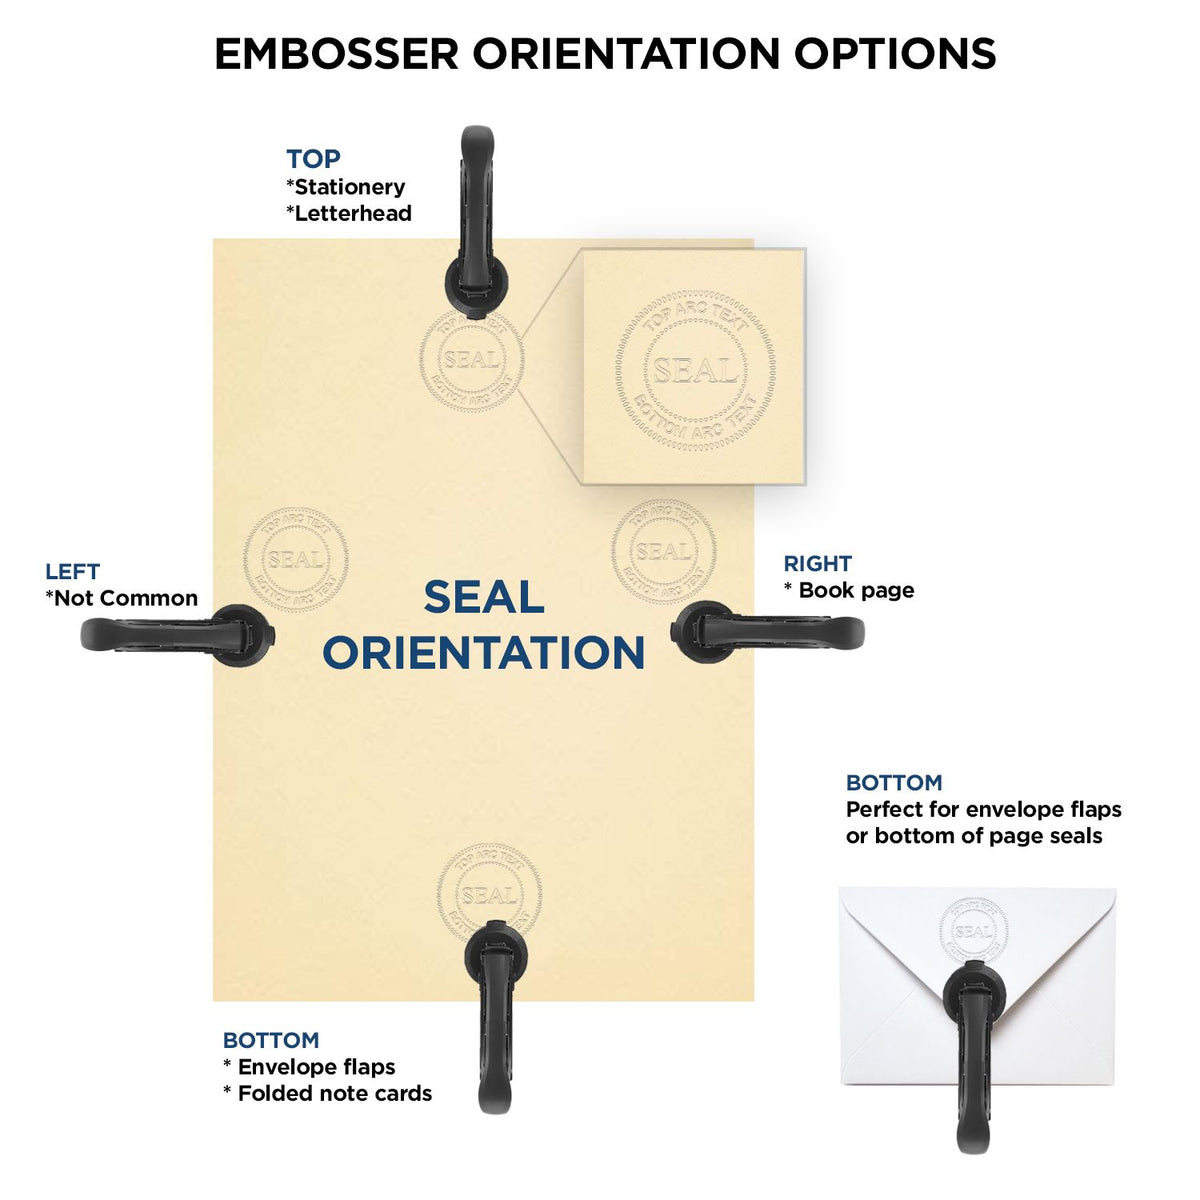 An infographic for the Soft South Dakota Professional Engineer Seal showing embosser orientation, this is showing examples of a top, bottom, right and left insert.